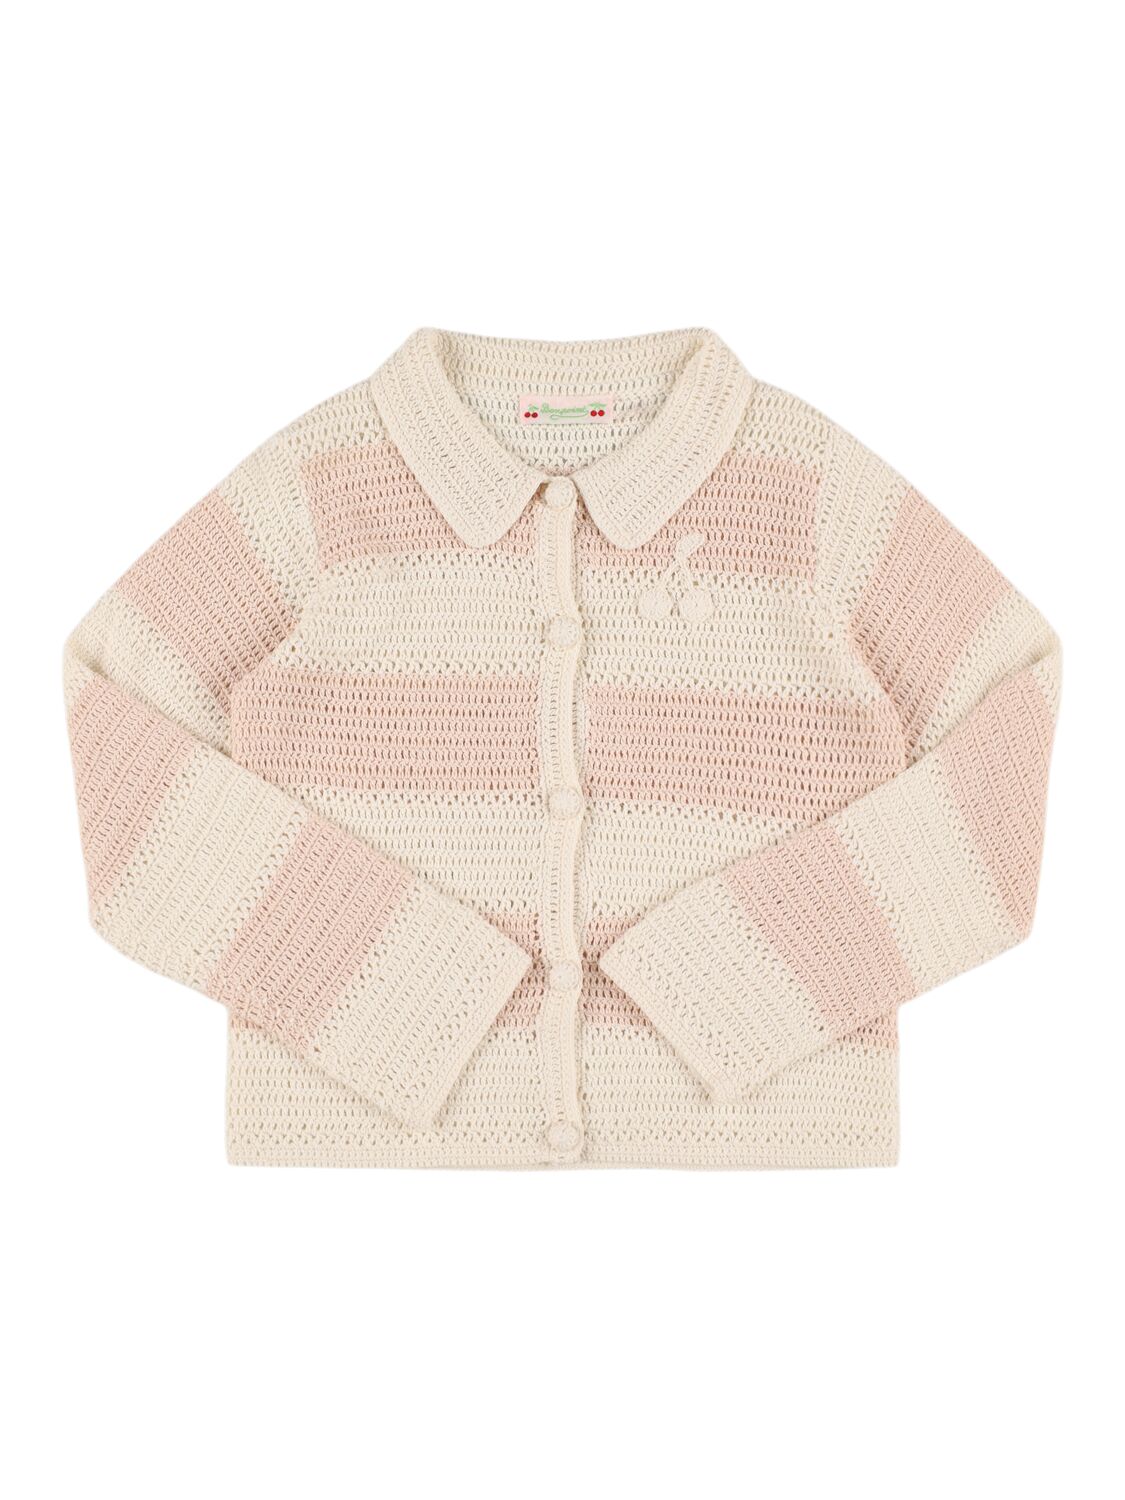 Bonpoint Kids' Hand-crocheted Cotton Cardigan In Pink